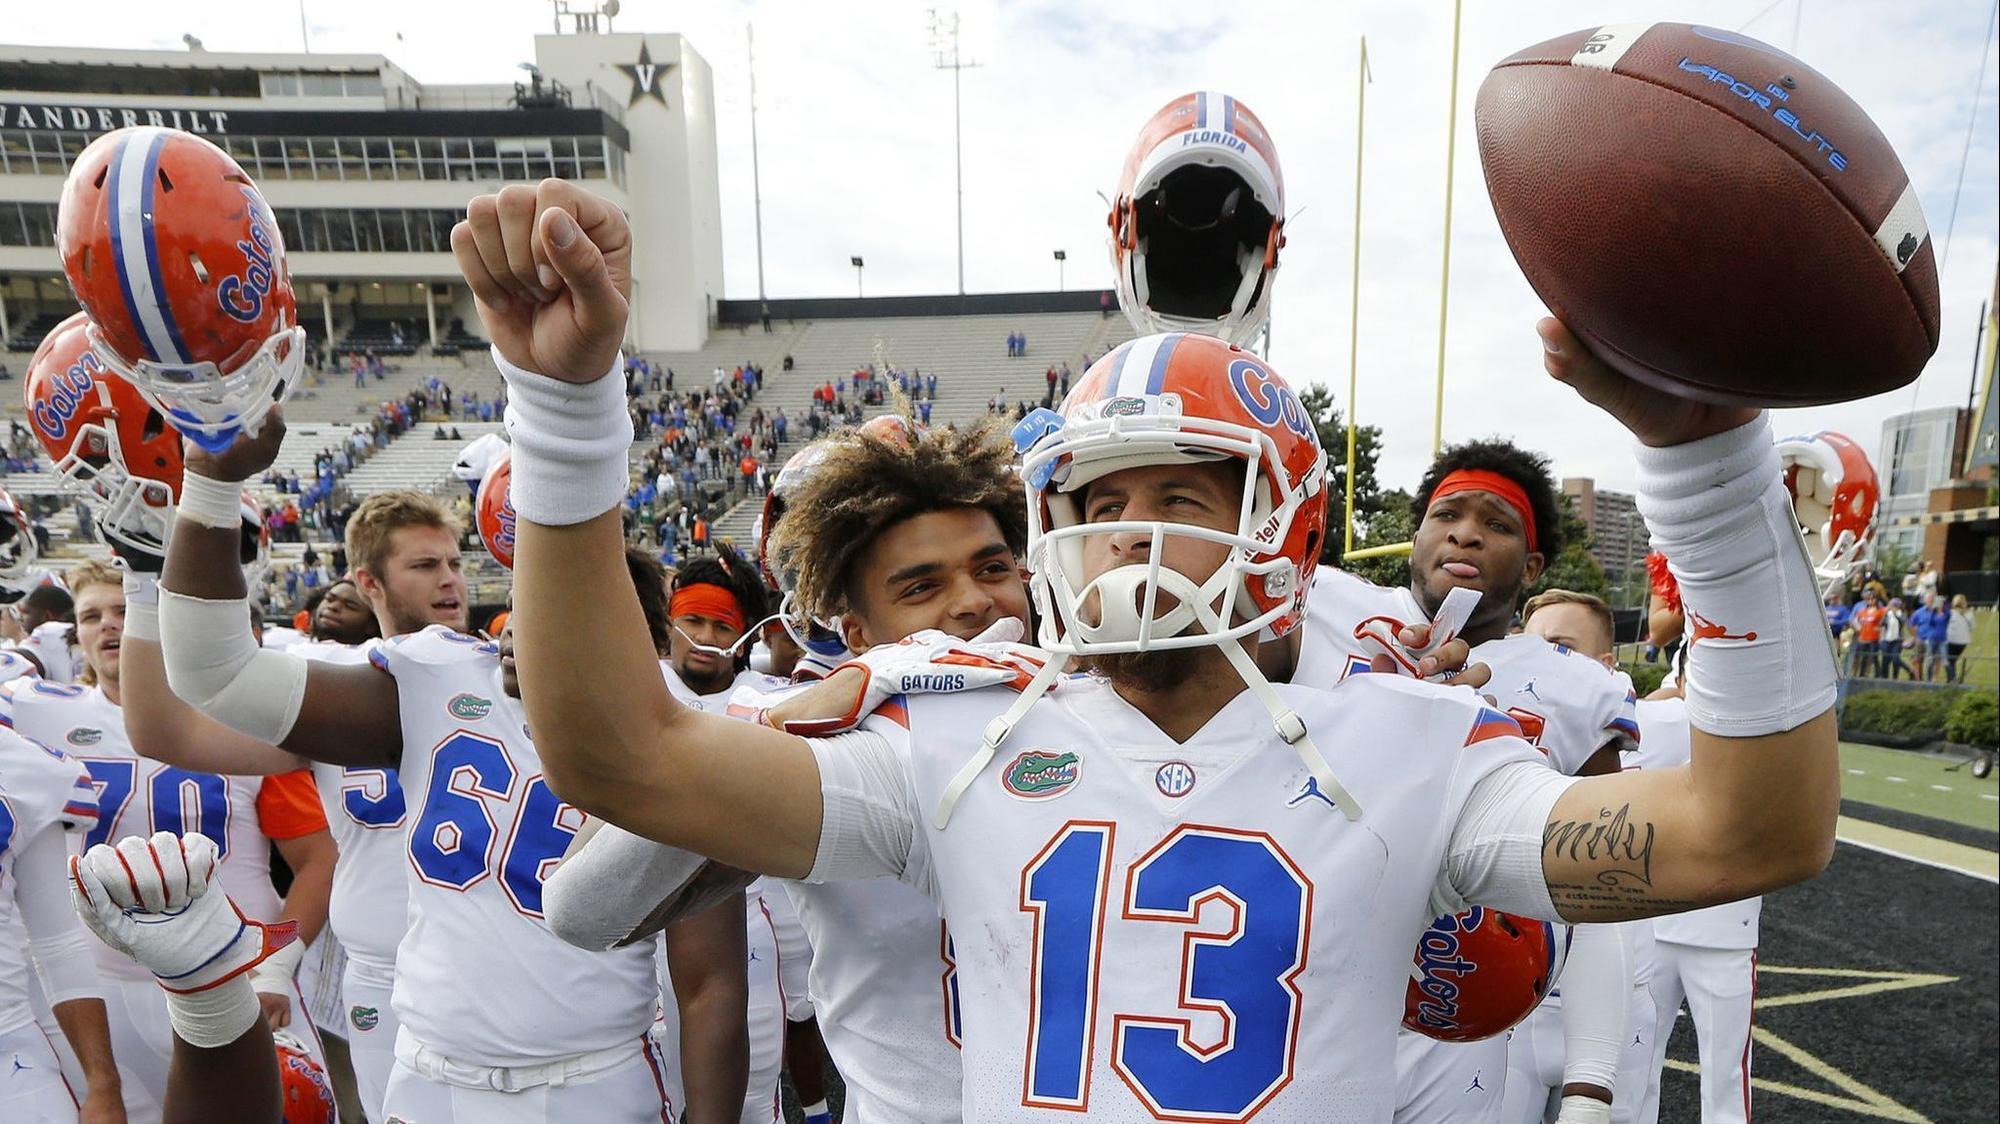 UF QB Feleipe Franks comfortable, in command as he distances himself in